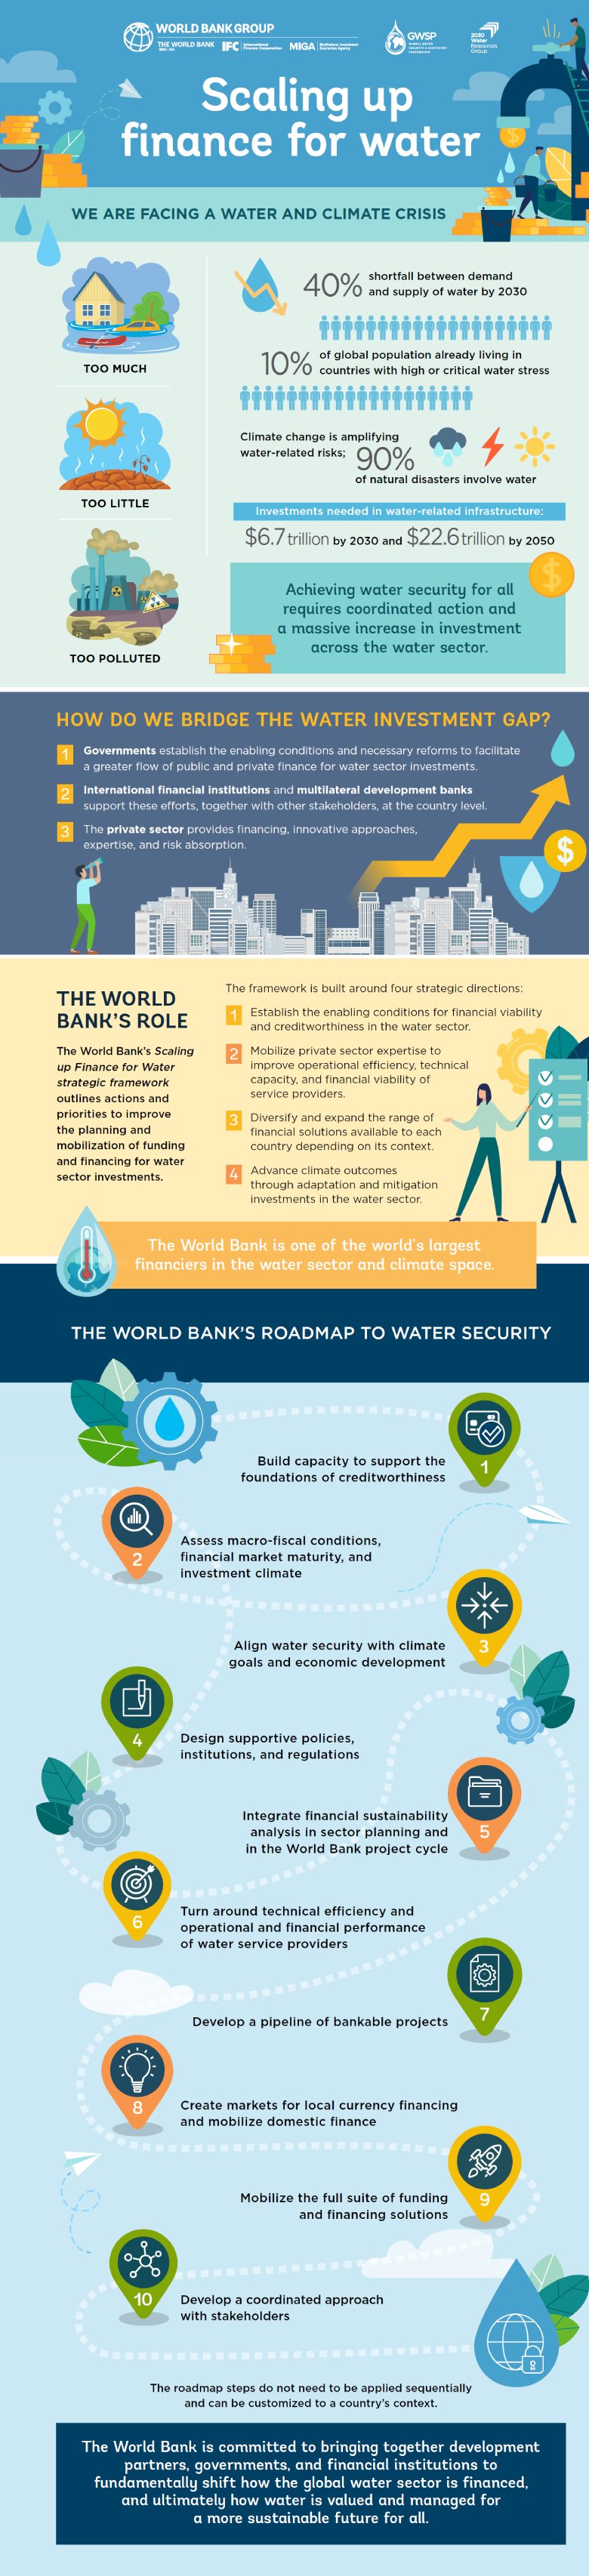 Scaling Up Finance for Water Full Infographic